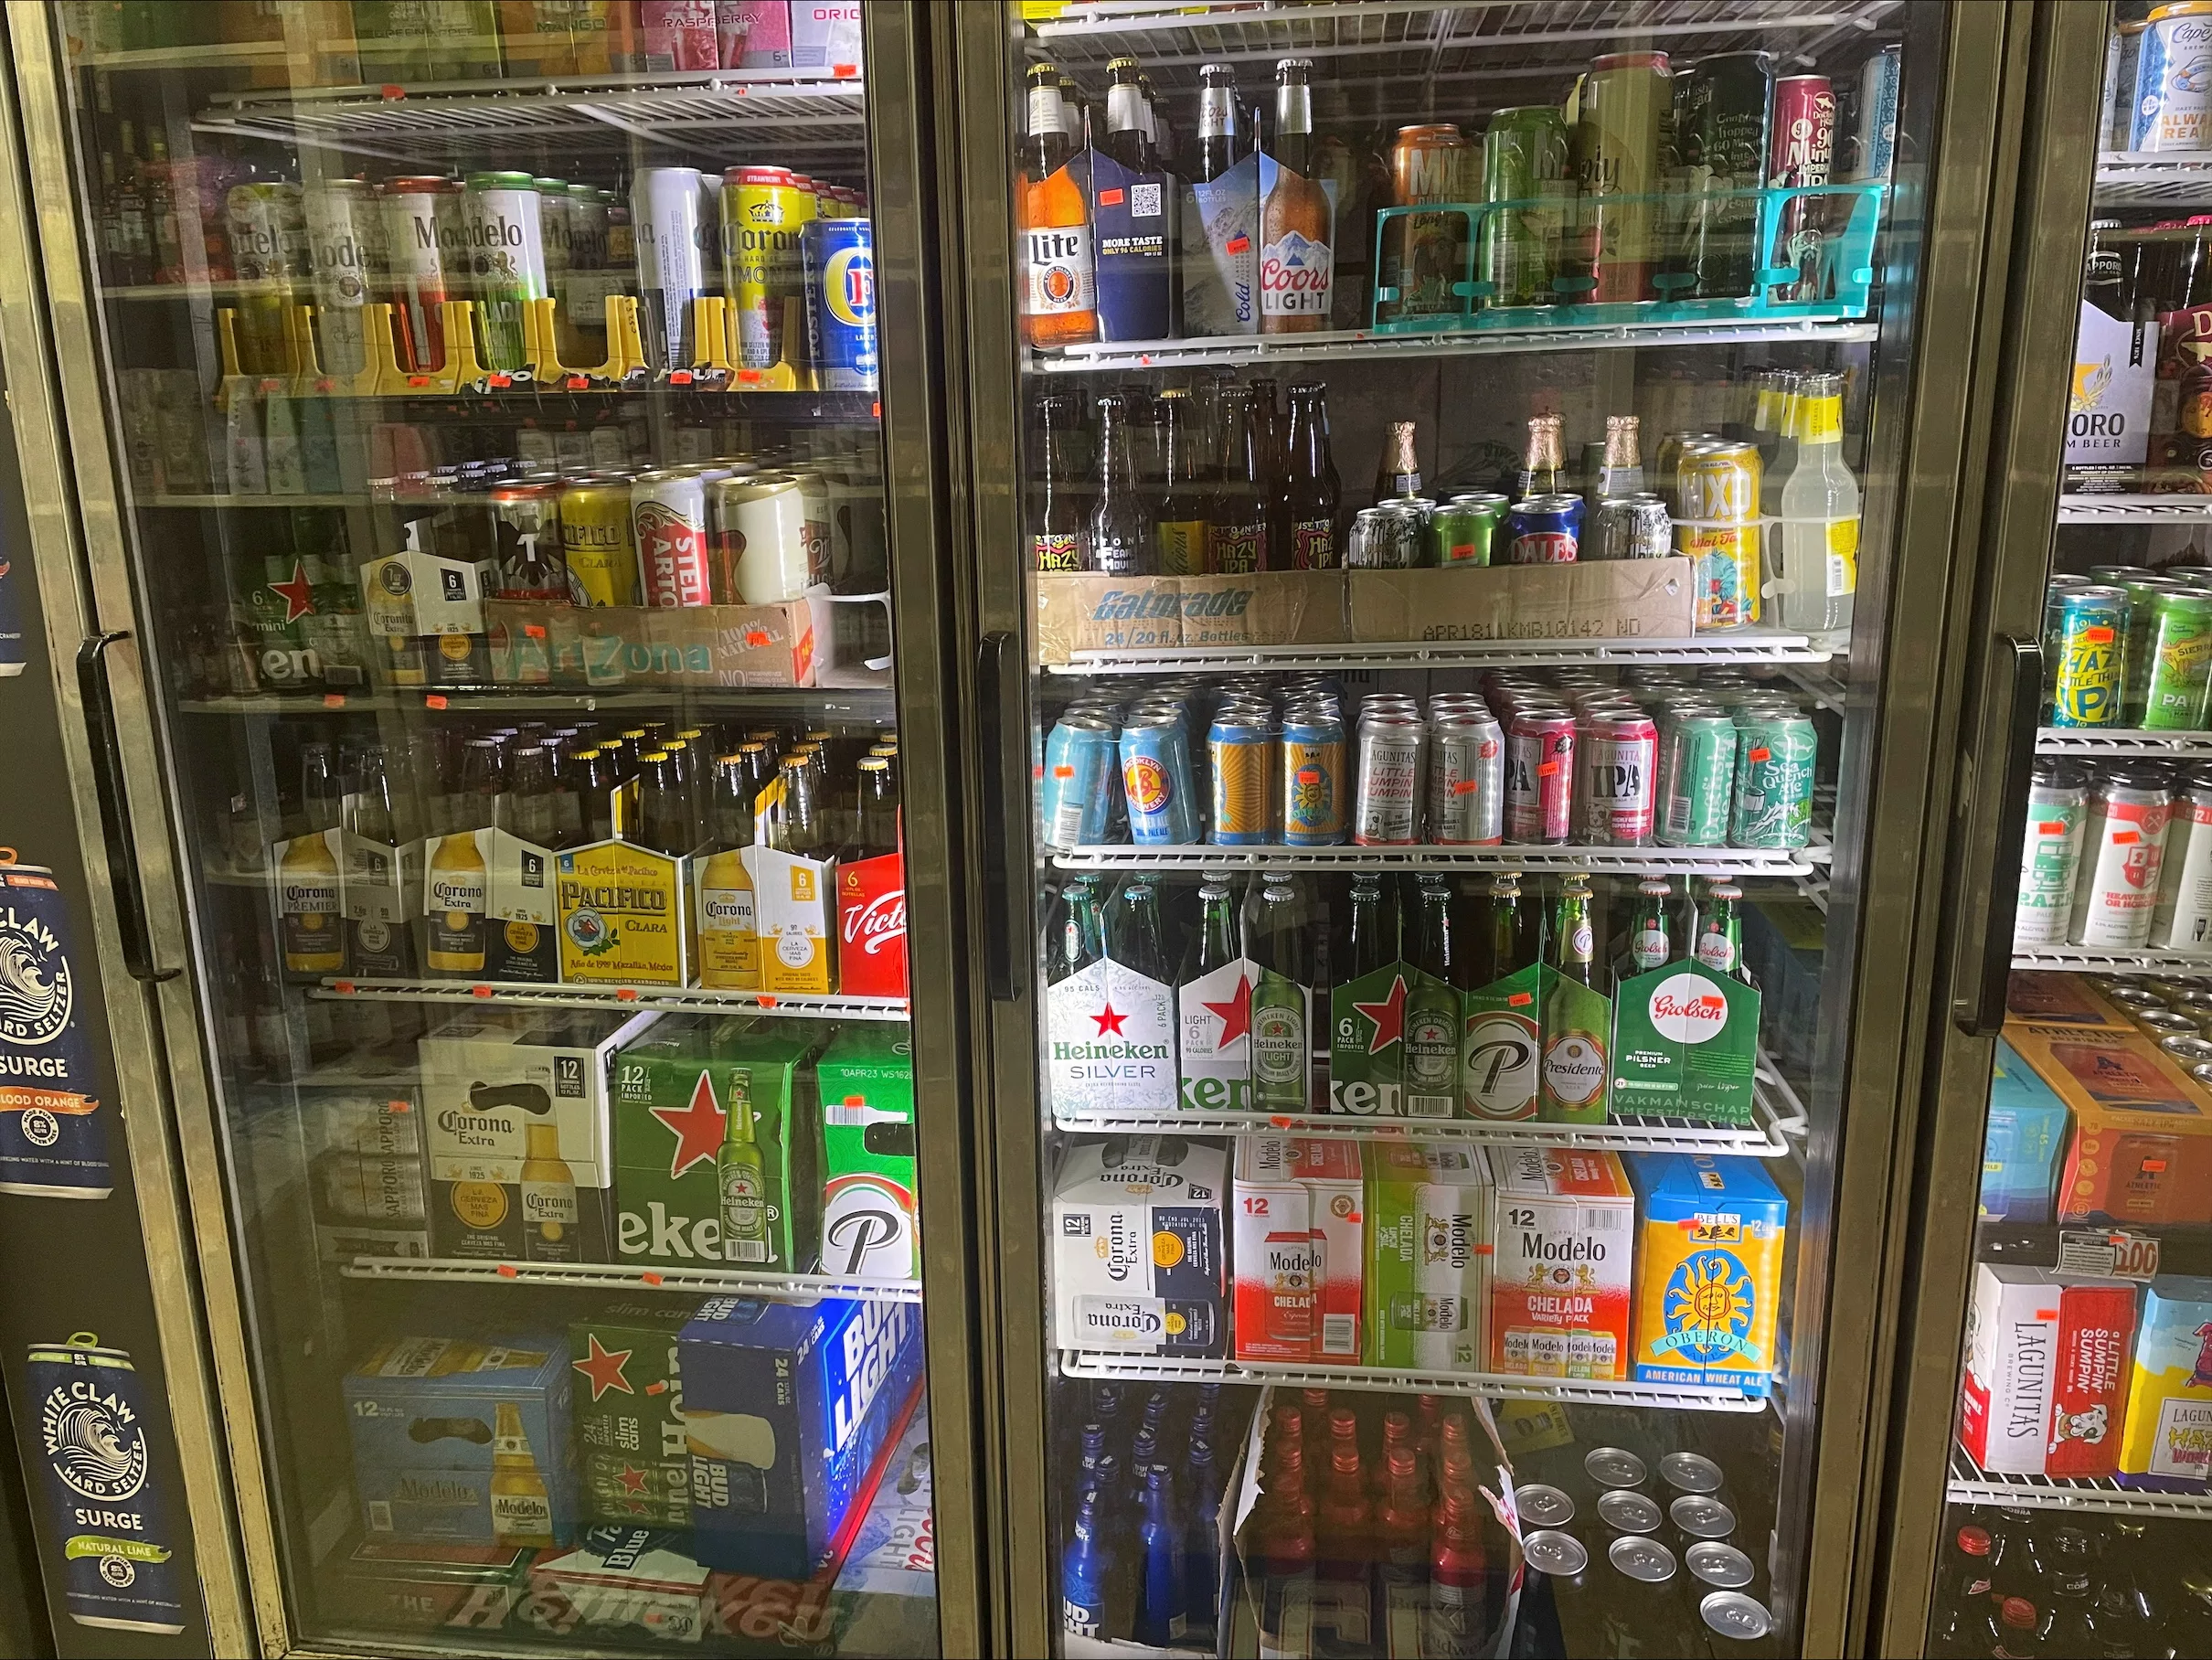 bottles-of-heineken-silver-are-seen-in-a-fridge-among-other-beers-at-convenience-store-in-jersey-city